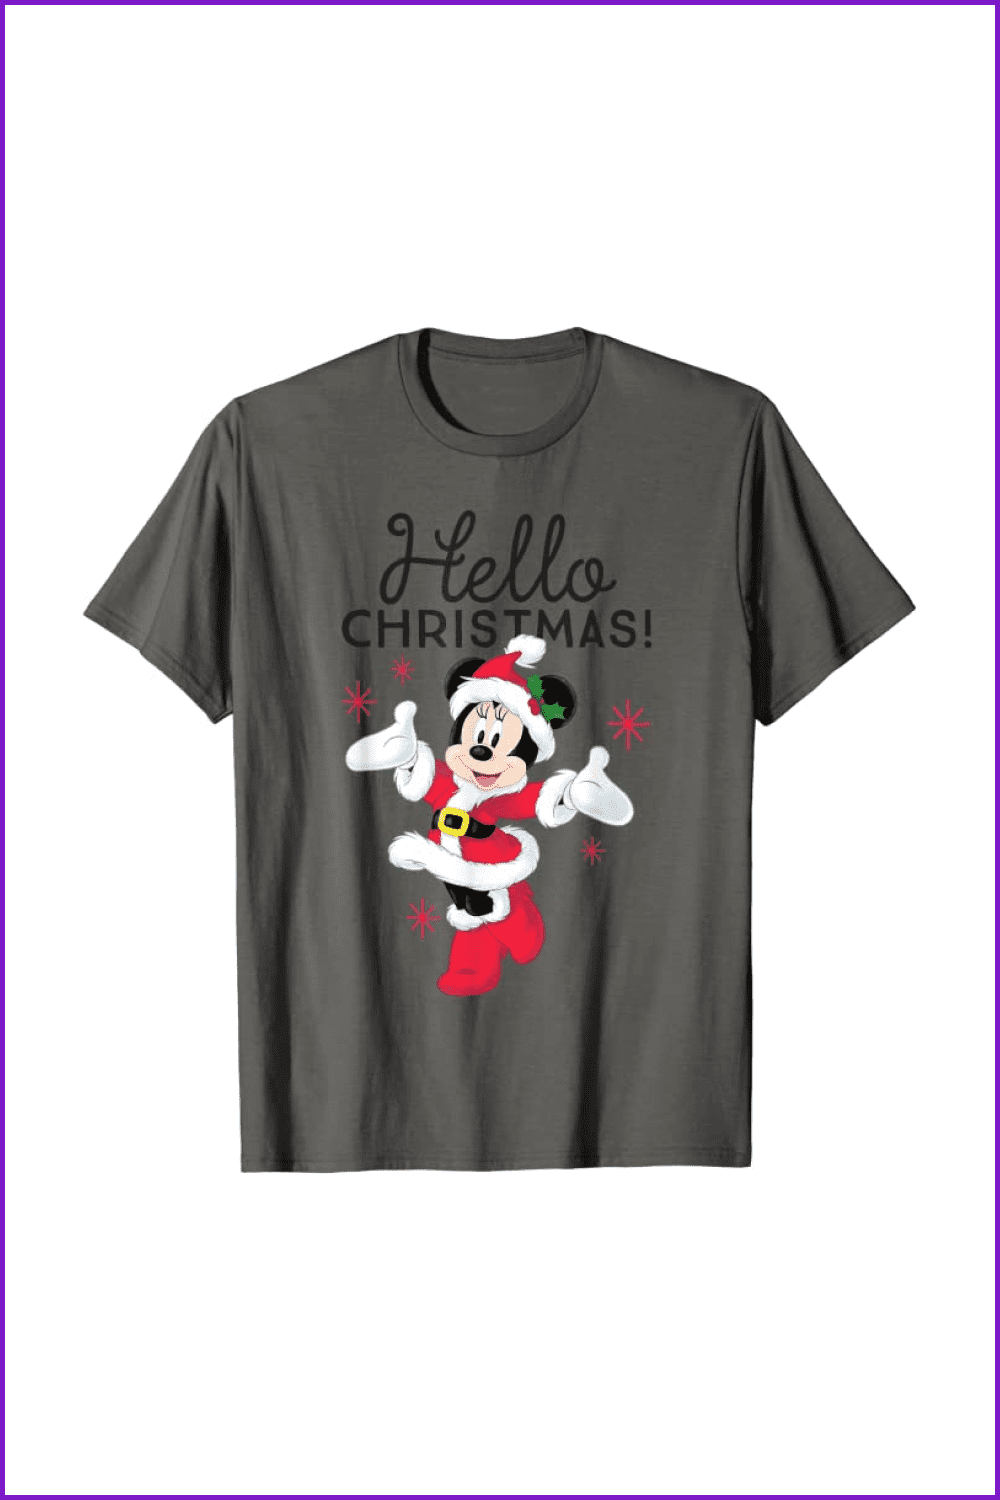 Grey t-shirt with Minnie Mouse in a Santa costume.